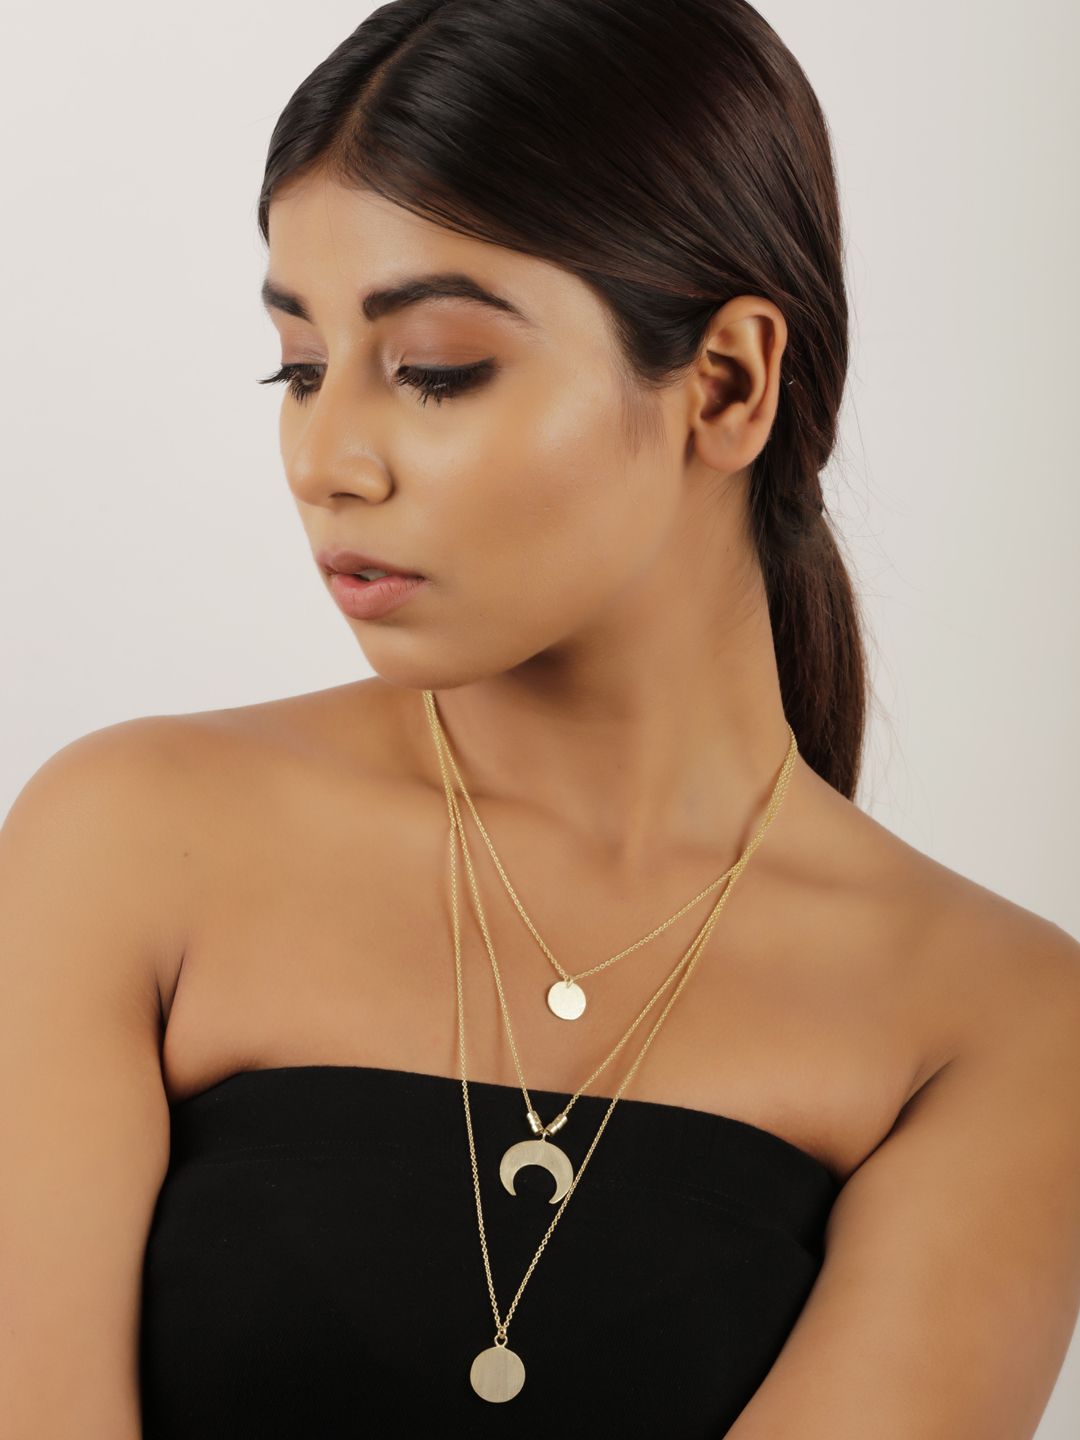 STILSKII Unisex Gold-Toned Brass Gold-Plated Minimal Necklace Chain Price in India